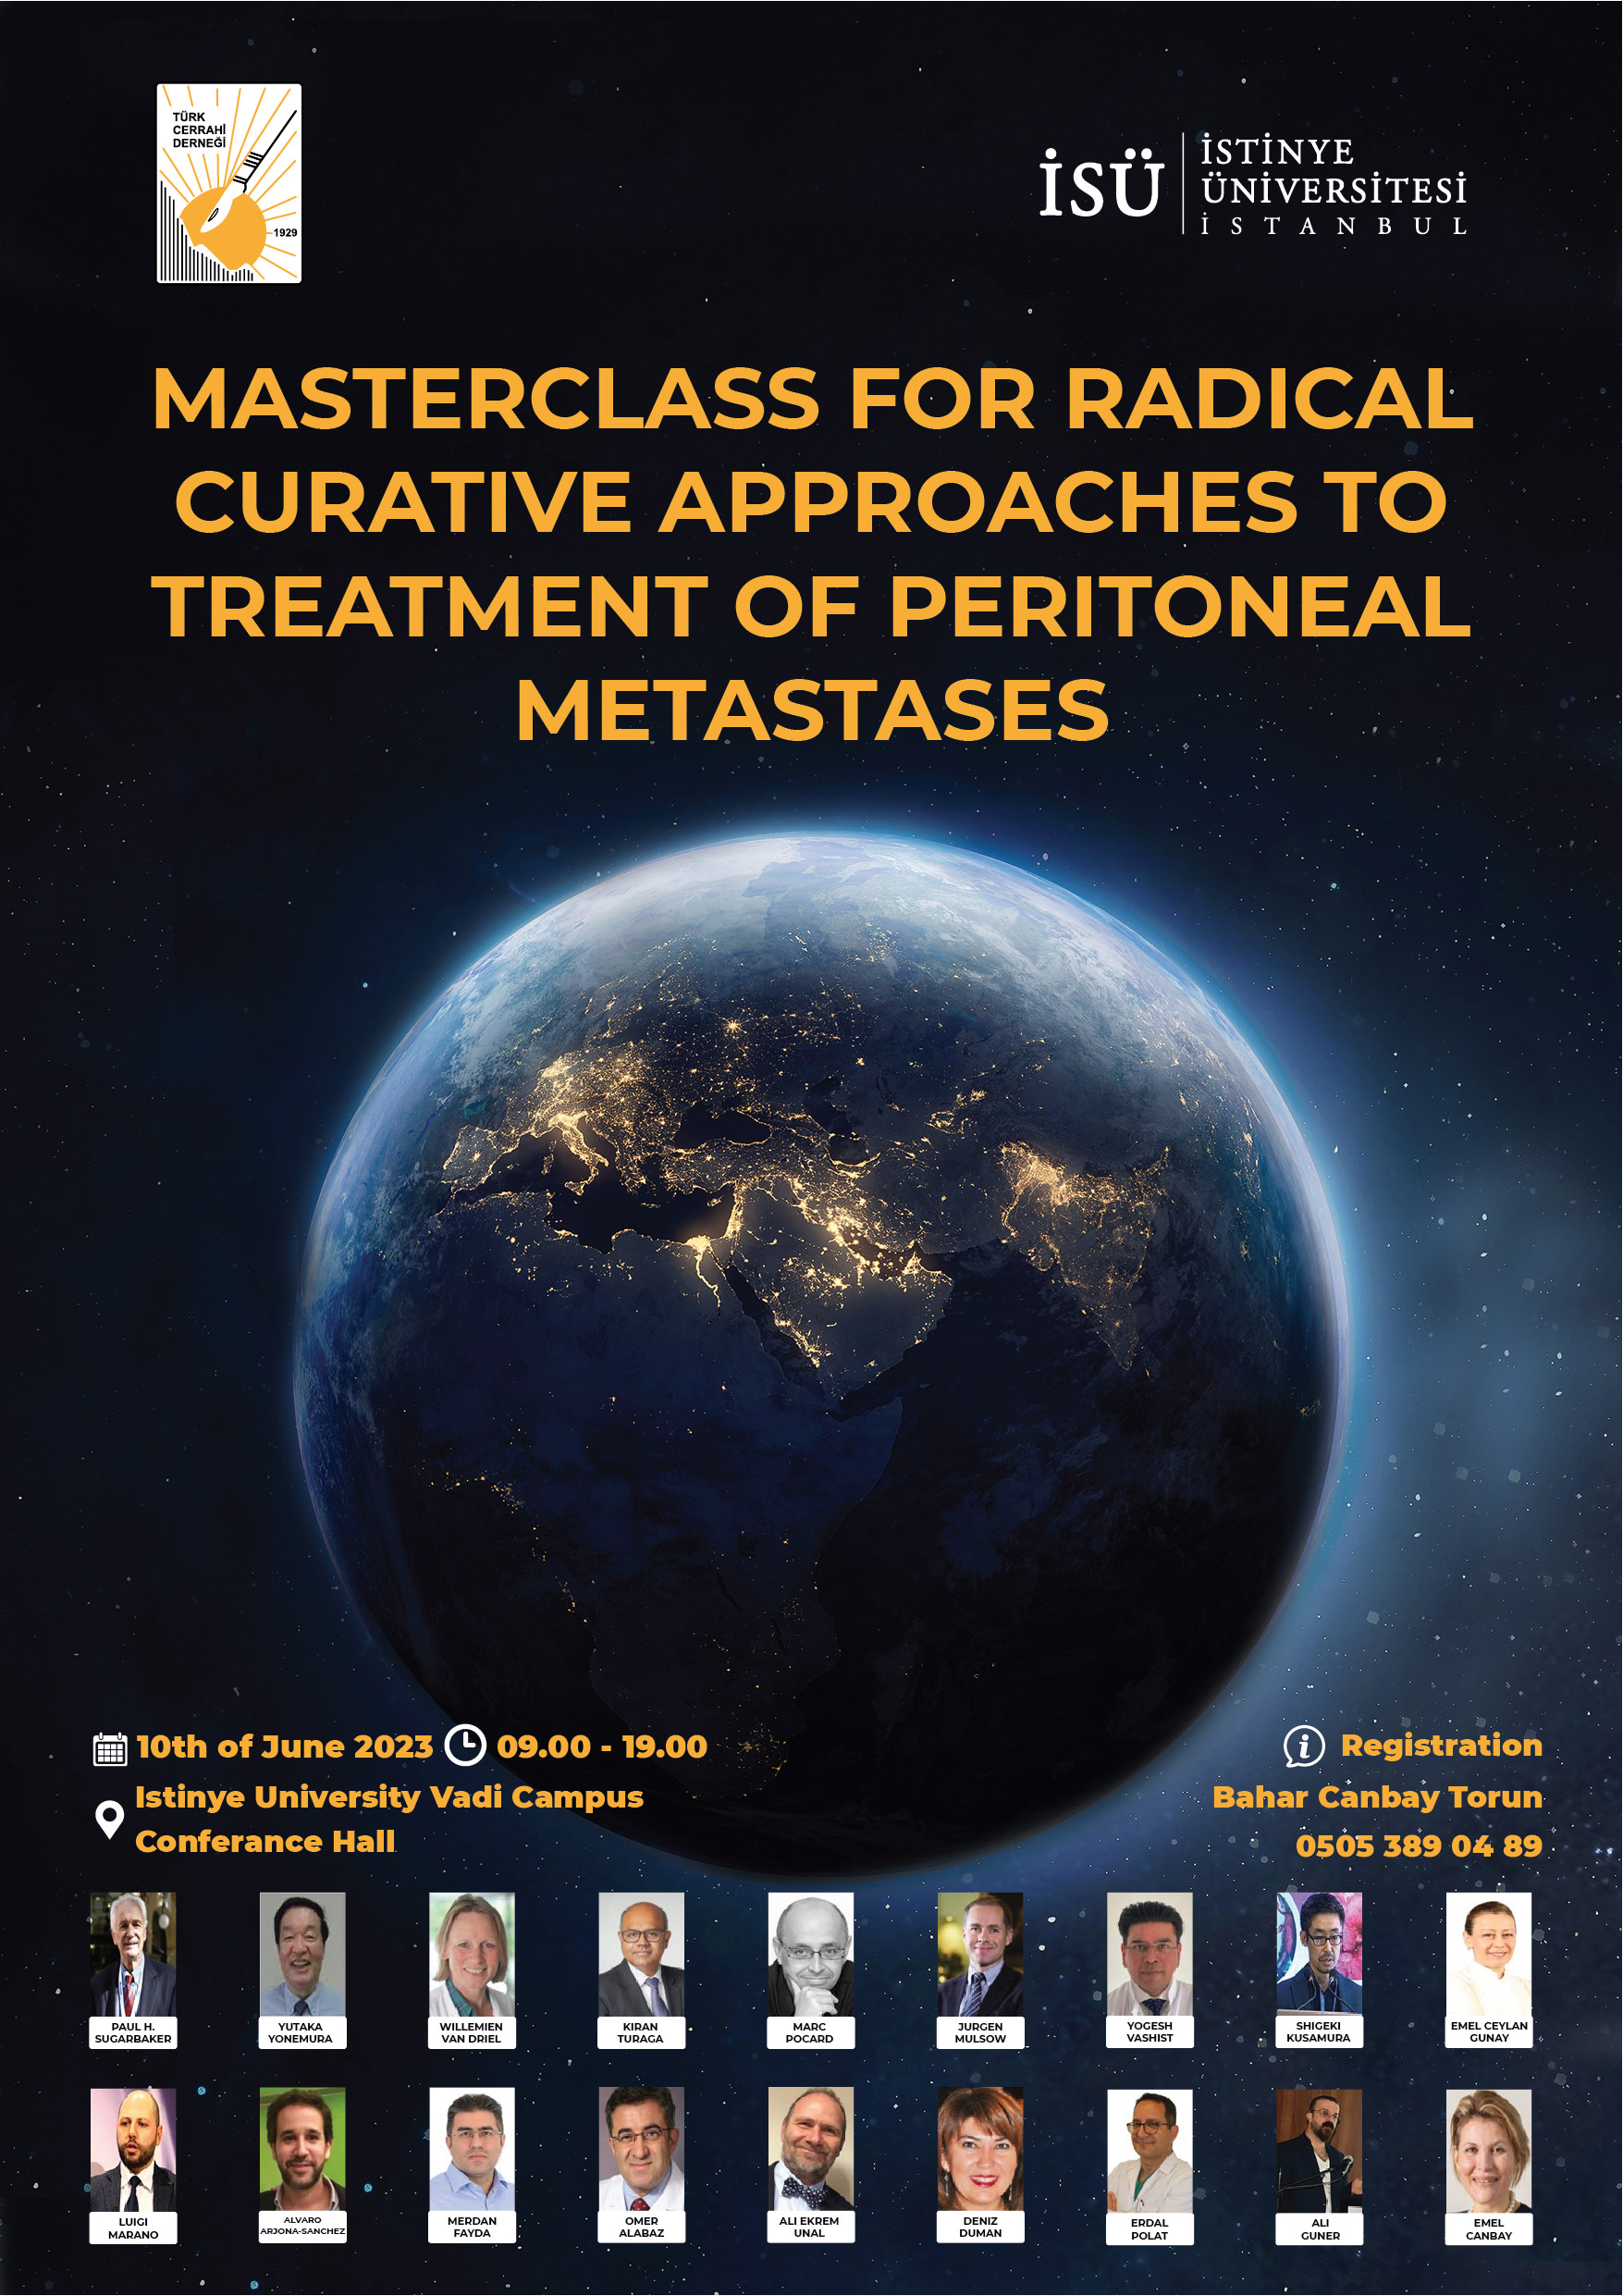 Masterclass For Radical Curative Approaches To Treatment Of Peritoneal Metastases